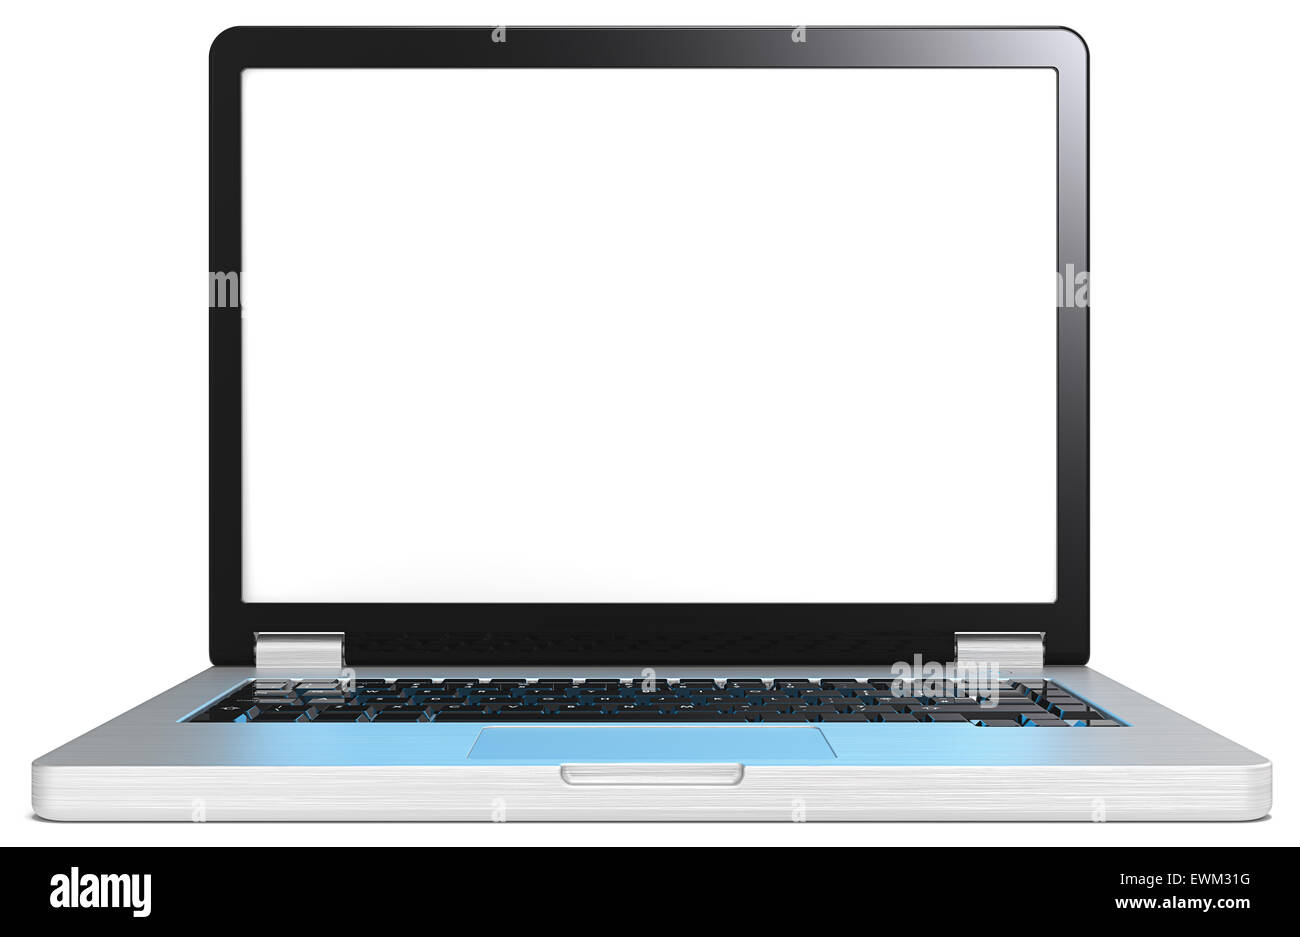 Laptop of brushed steel and black. No branded. Blank screen for copy space. Realistic blue light reflection on keyboard. Stock Photo